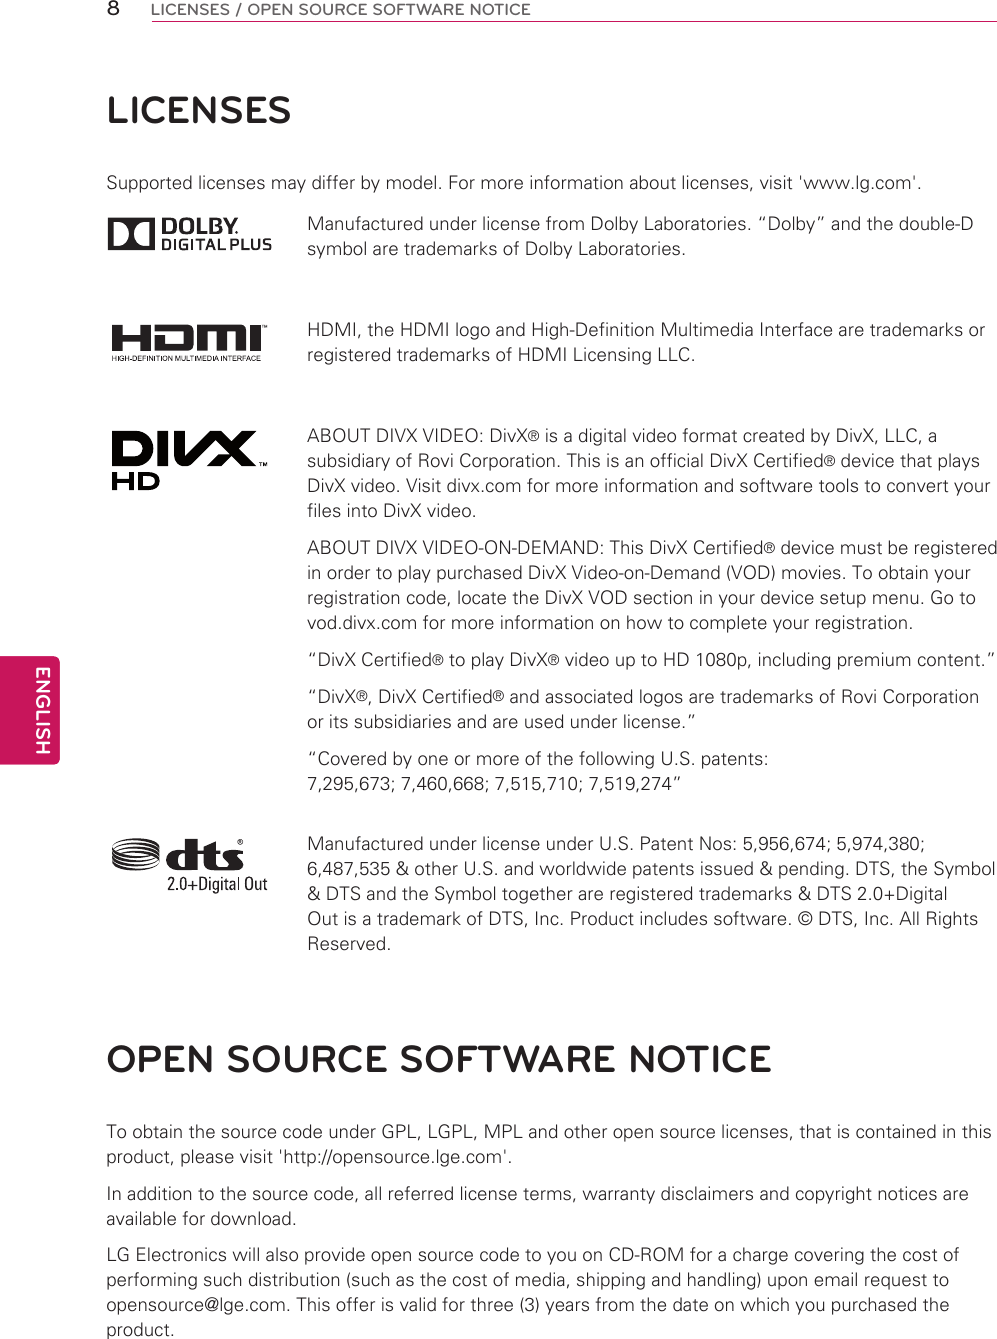 8ENGENGLISHLICENSES / OPEN SOURCE SOFTWARE NOTICELICENSESSupported licenses may differ by model. For more information about licenses, visit &apos;www.lg.com&apos;.Manufactured under license from Dolby Laboratories. “Dolby” and the double-D symbol are trademarks of Dolby Laboratories.HDMI, the HDMI logo and High-Definition Multimedia Interface are trademarks or registered trademarks of HDMI Licensing LLC.ABOUT DIVX VIDEO: DivX® is a digital video format created by DivX, LLC, a subsidiary of Rovi Corporation. This is an official DivX Certified® device that plays DivX video. Visit divx.com for more information and software tools to convert your files into DivX video.ABOUT DIVX VIDEO-ON-DEMAND: This DivX Certified® device must be registered in order to play purchased DivX Video-on-Demand (VOD) movies. To obtain your registration code, locate the DivX VOD section in your device setup menu. Go to vod.divx.com for more information on how to complete your registration. “DivX Certified® to play DivX® video up to HD 1080p, including premium content.”“DivX®, DivX Certified® and associated logos are trademarks of Rovi Corporation or its subsidiaries and are used under license.”“Covered by one or more of the following U.S. patents: 7,295,673; 7,460,668; 7,515,710; 7,519,274”Manufactured under license under U.S. Patent Nos: 5,956,674; 5,974,380; 6,487,535 &amp; other U.S. and worldwide patents issued &amp; pending. DTS, the Symbol &amp; DTS and the Symbol together are registered trademarks &amp; DTS 2.0+Digital Out is a trademark of DTS, Inc. Product includes software. © DTS, Inc. All Rights Reserved.OPEN SOURCE SOFTWARE NOTICETo obtain the source code under GPL, LGPL, MPL and other open source licenses, that is contained in this product, please visit &apos;http://opensource.lge.com&apos;.In addition to the source code, all referred license terms, warranty disclaimers and copyright notices are available for download.LG Electronics will also provide open source code to you on CD-ROM for a charge covering the cost of performing such distribution (such as the cost of media, shipping and handling) upon email request to opensource@lge.com. This offer is valid for three (3) years from the date on which you purchased the product.